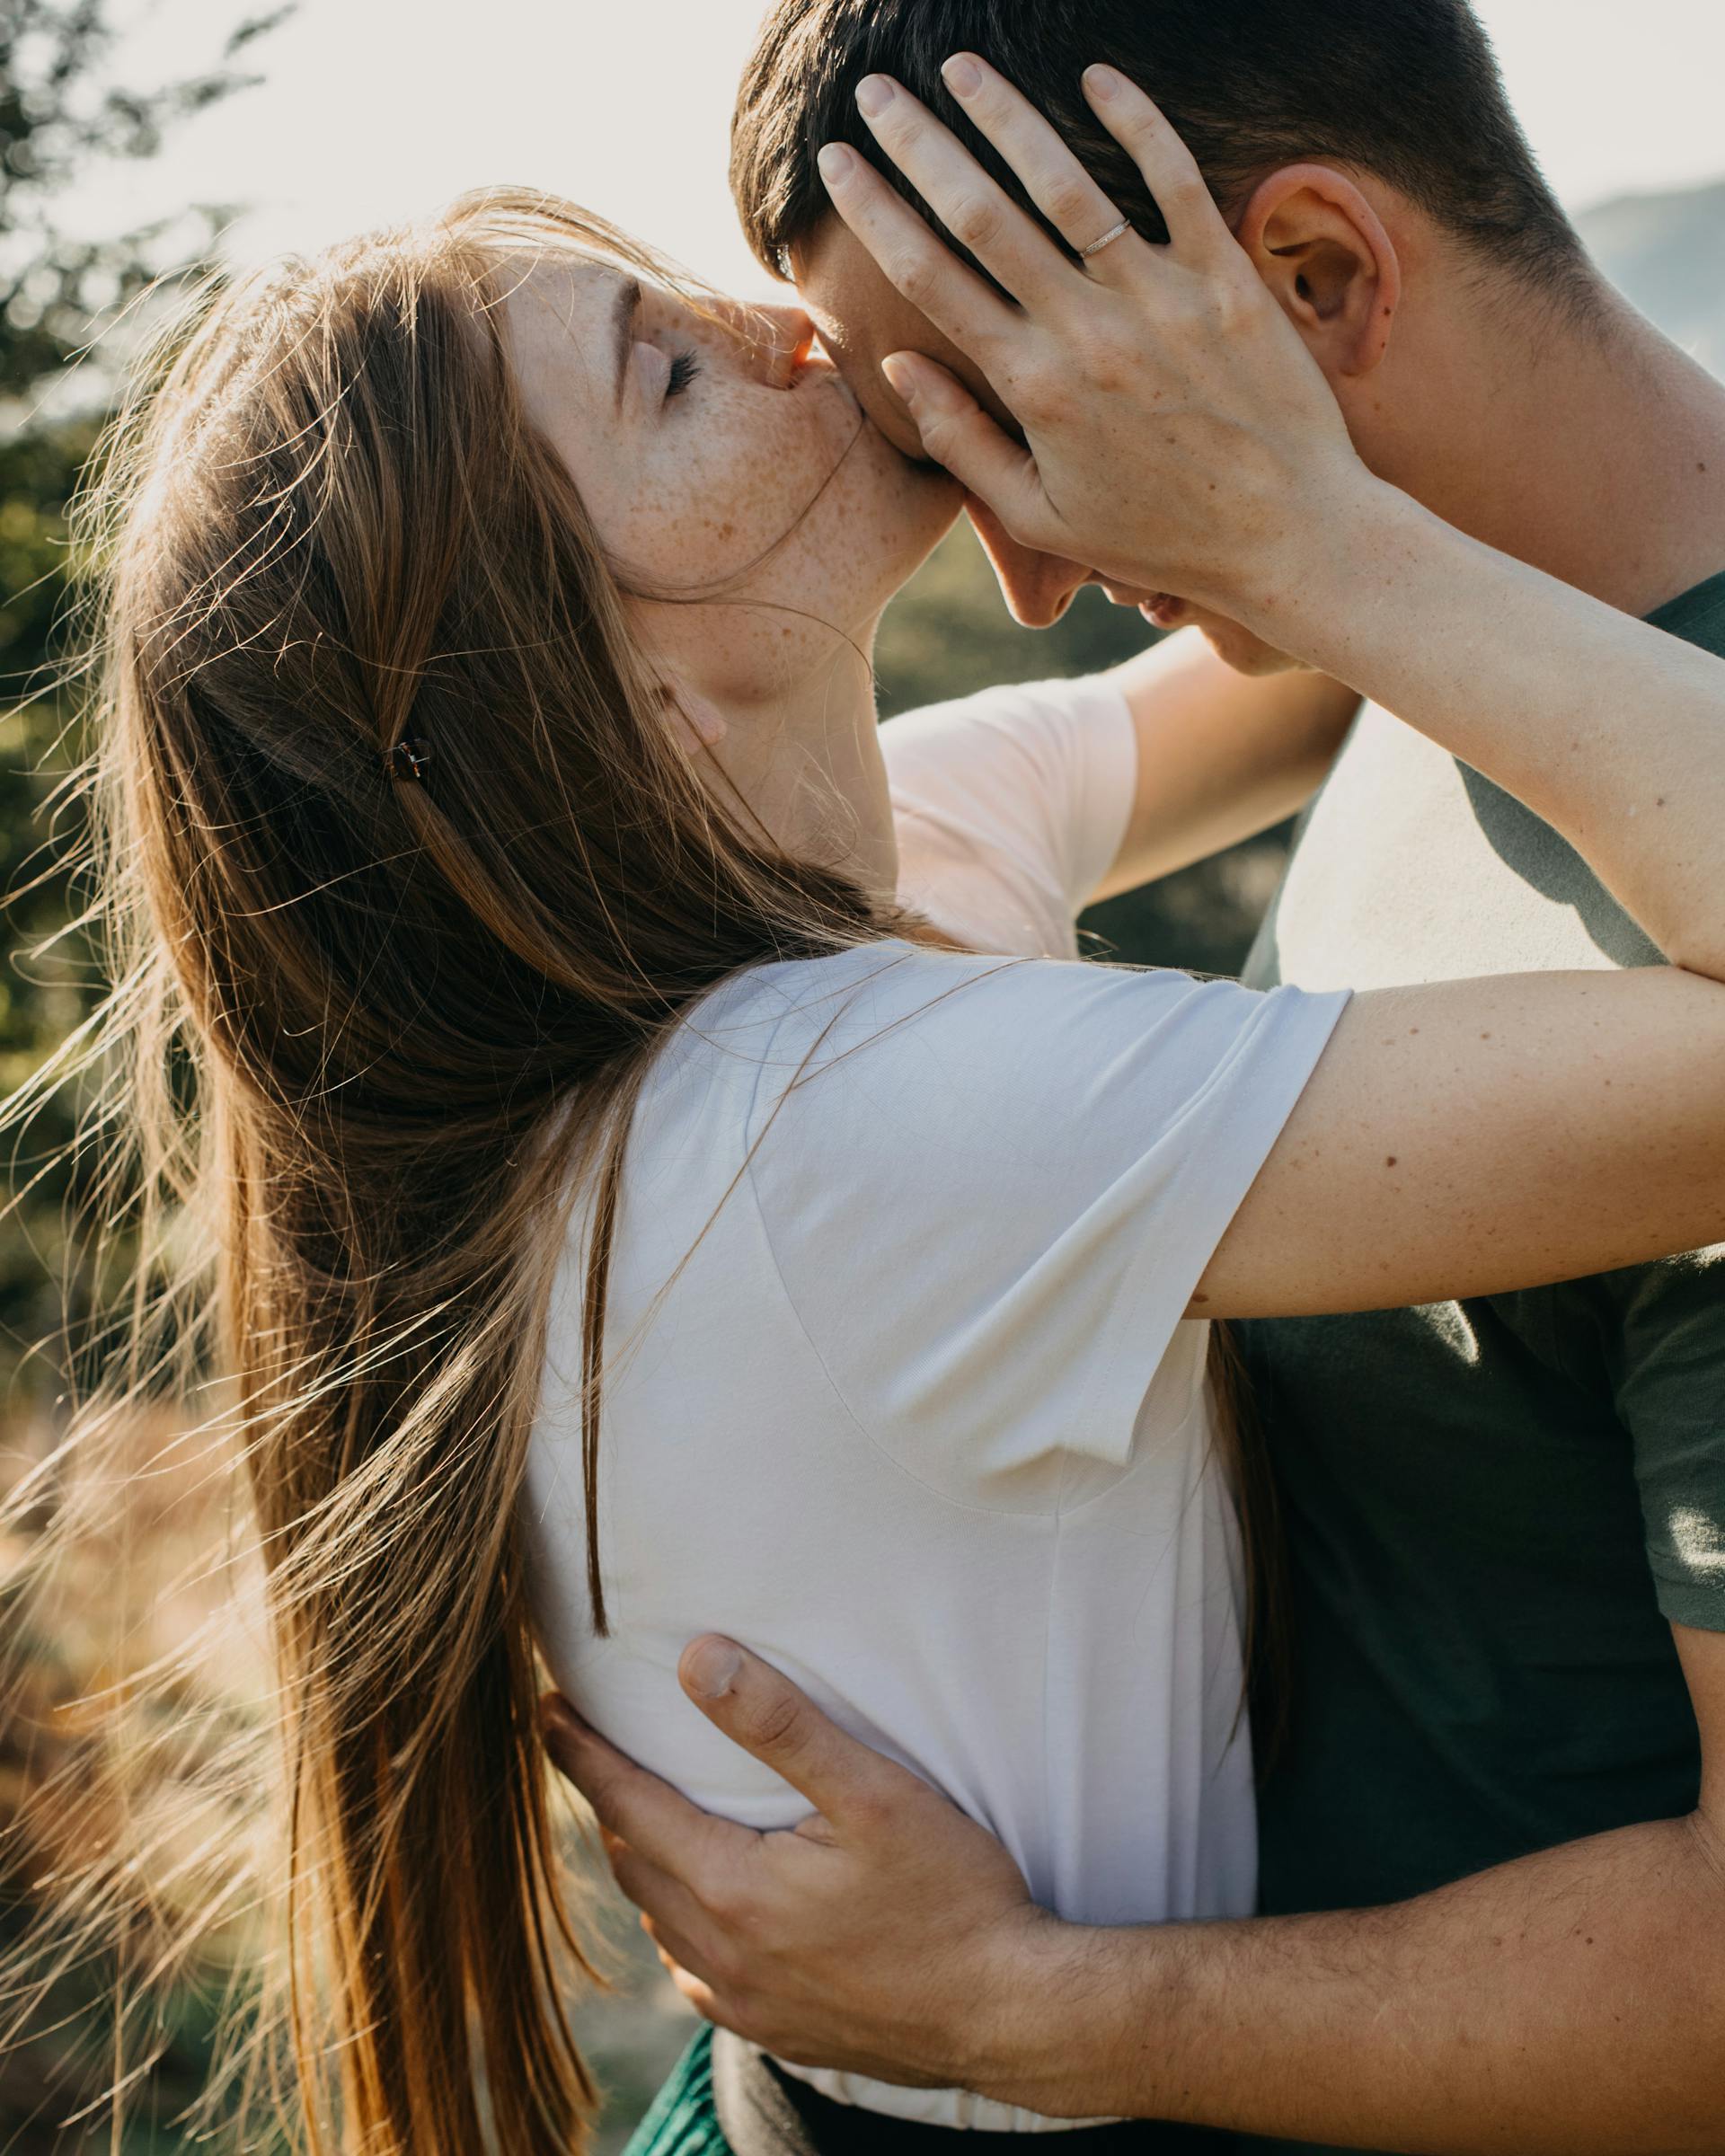 A woman kissing her boyfriend on the forehead | Source:Pexels